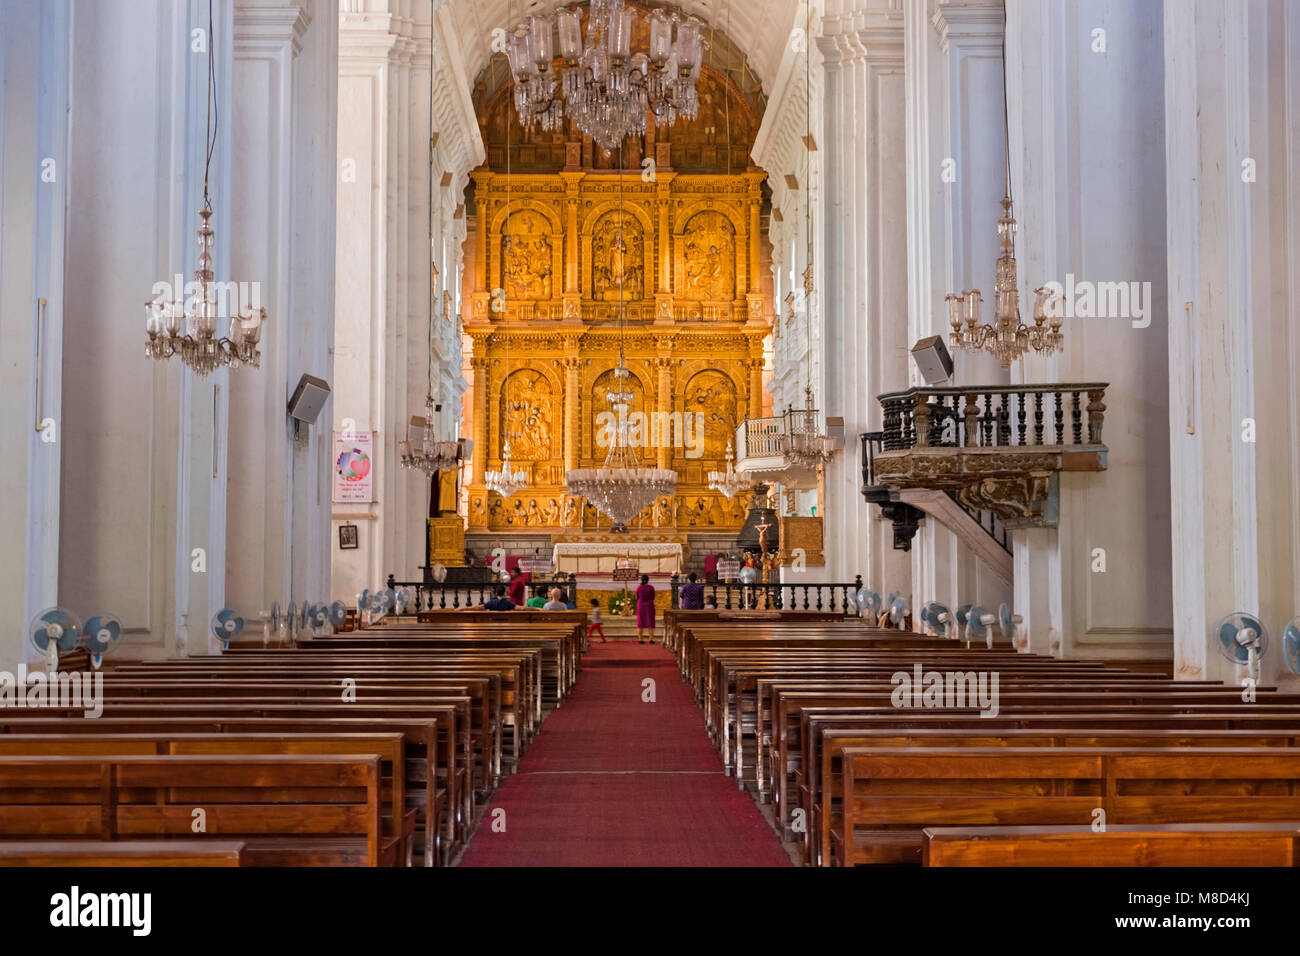 The Sé Cathedral interior Old Goa India Stock Photo